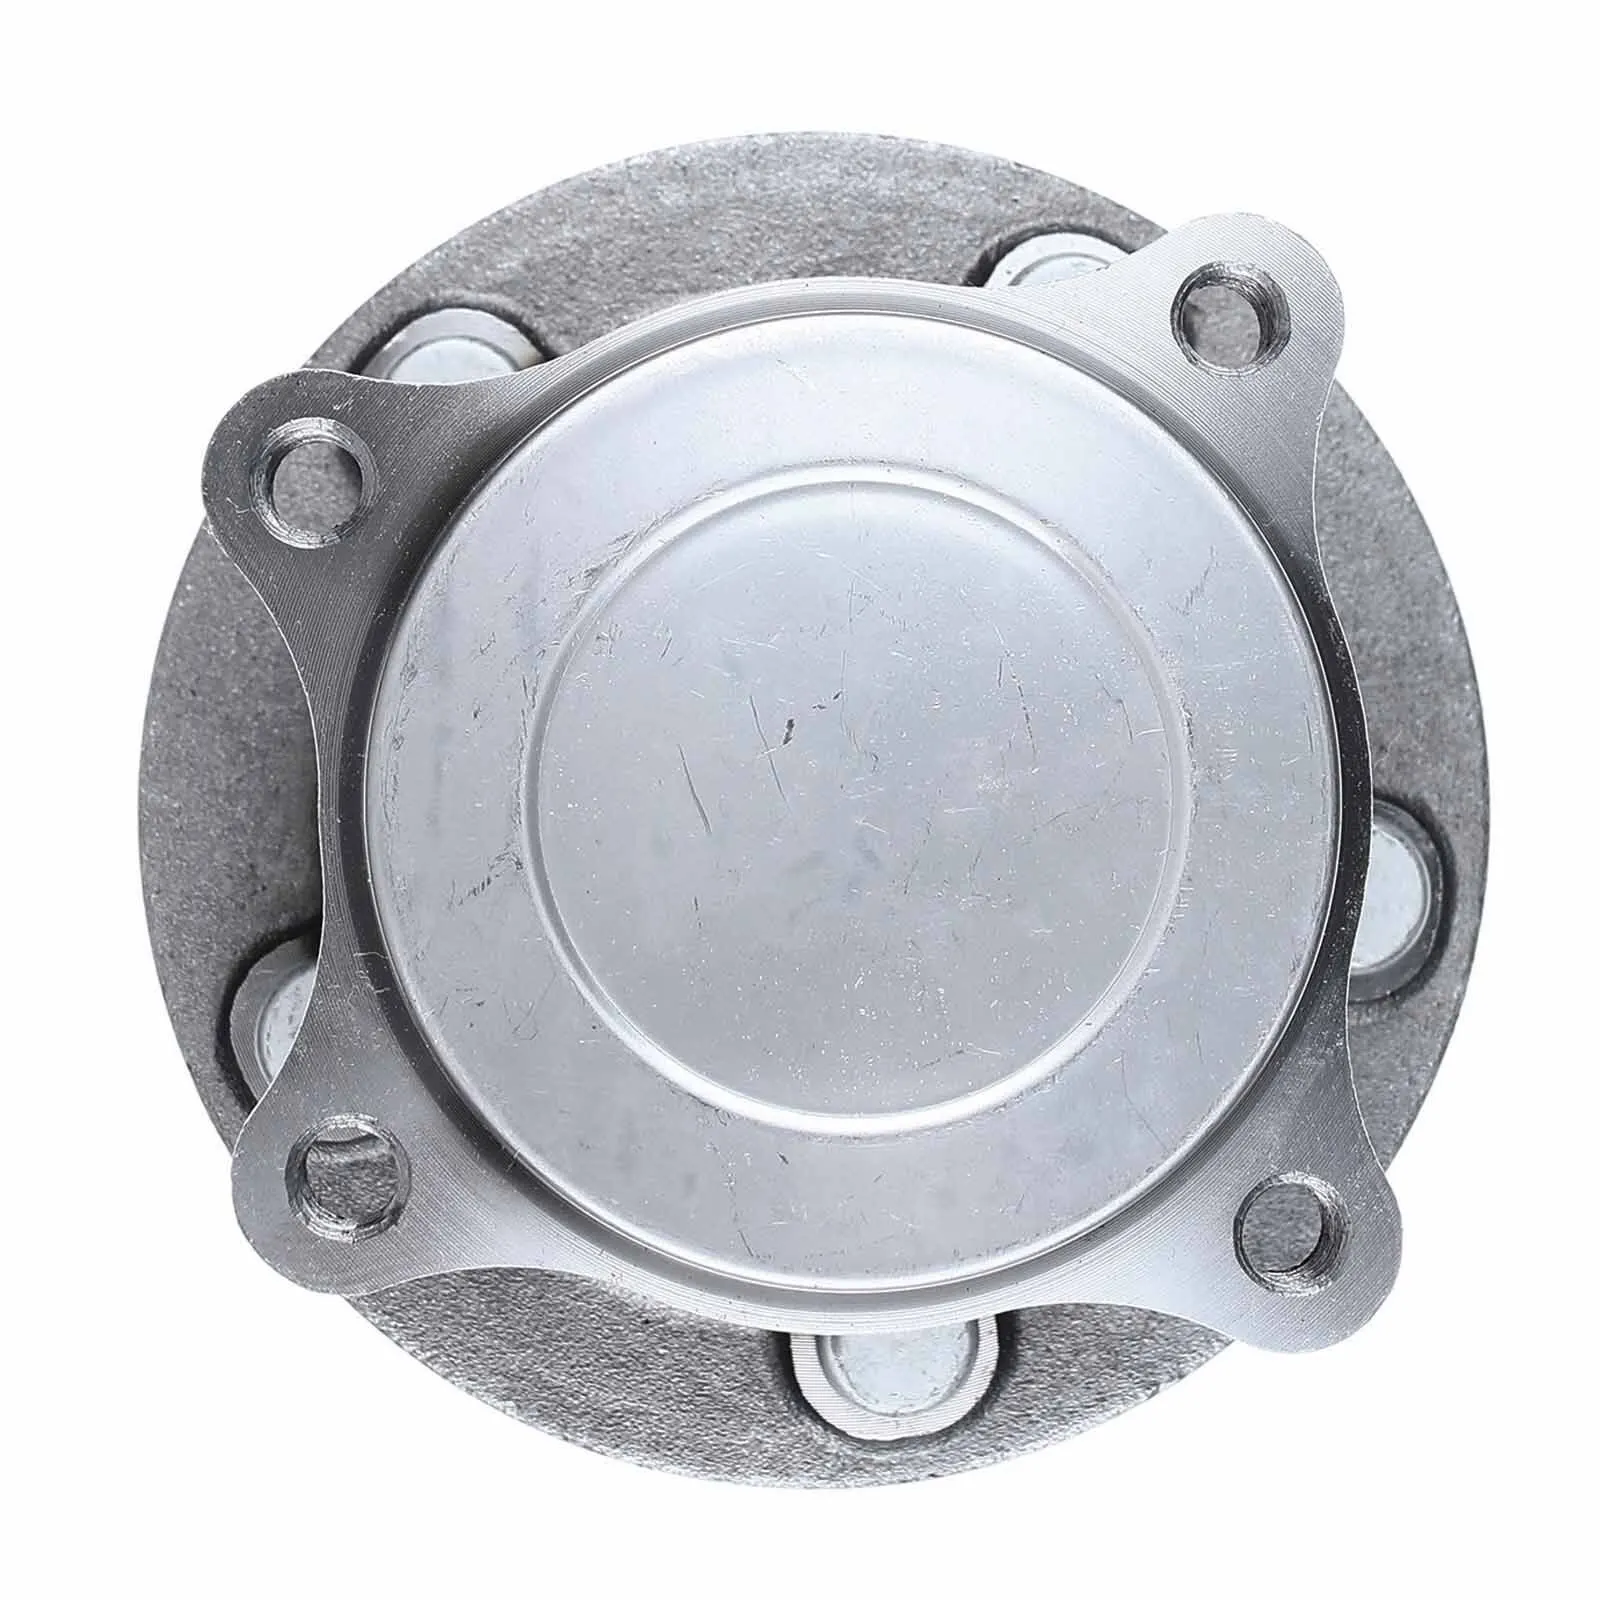 

A3 Wholesales New Rear Left or Right Wheel Hub Bearing Assembly for Chevrolet Cruze 2016-2019